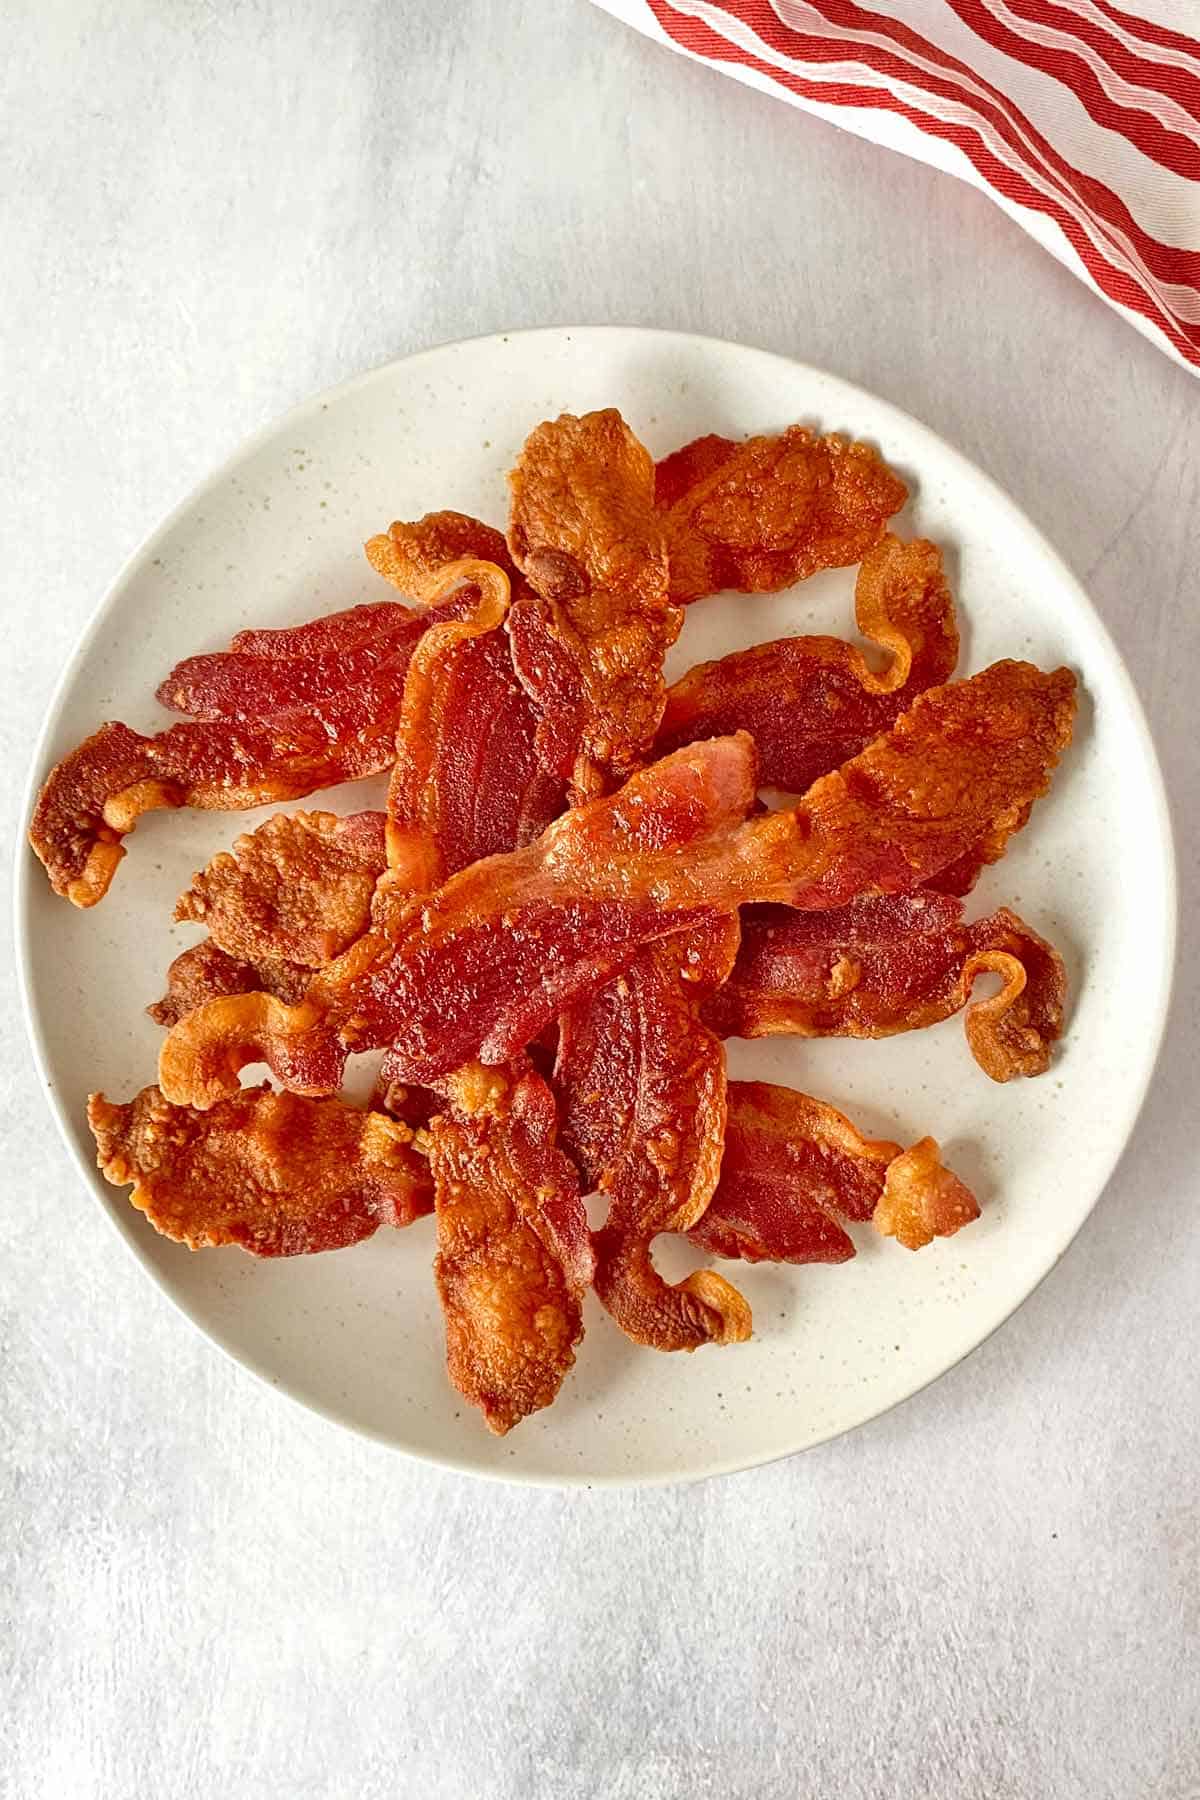 A pile of golden brown cooked flour-coated bacon on a white serving plate.